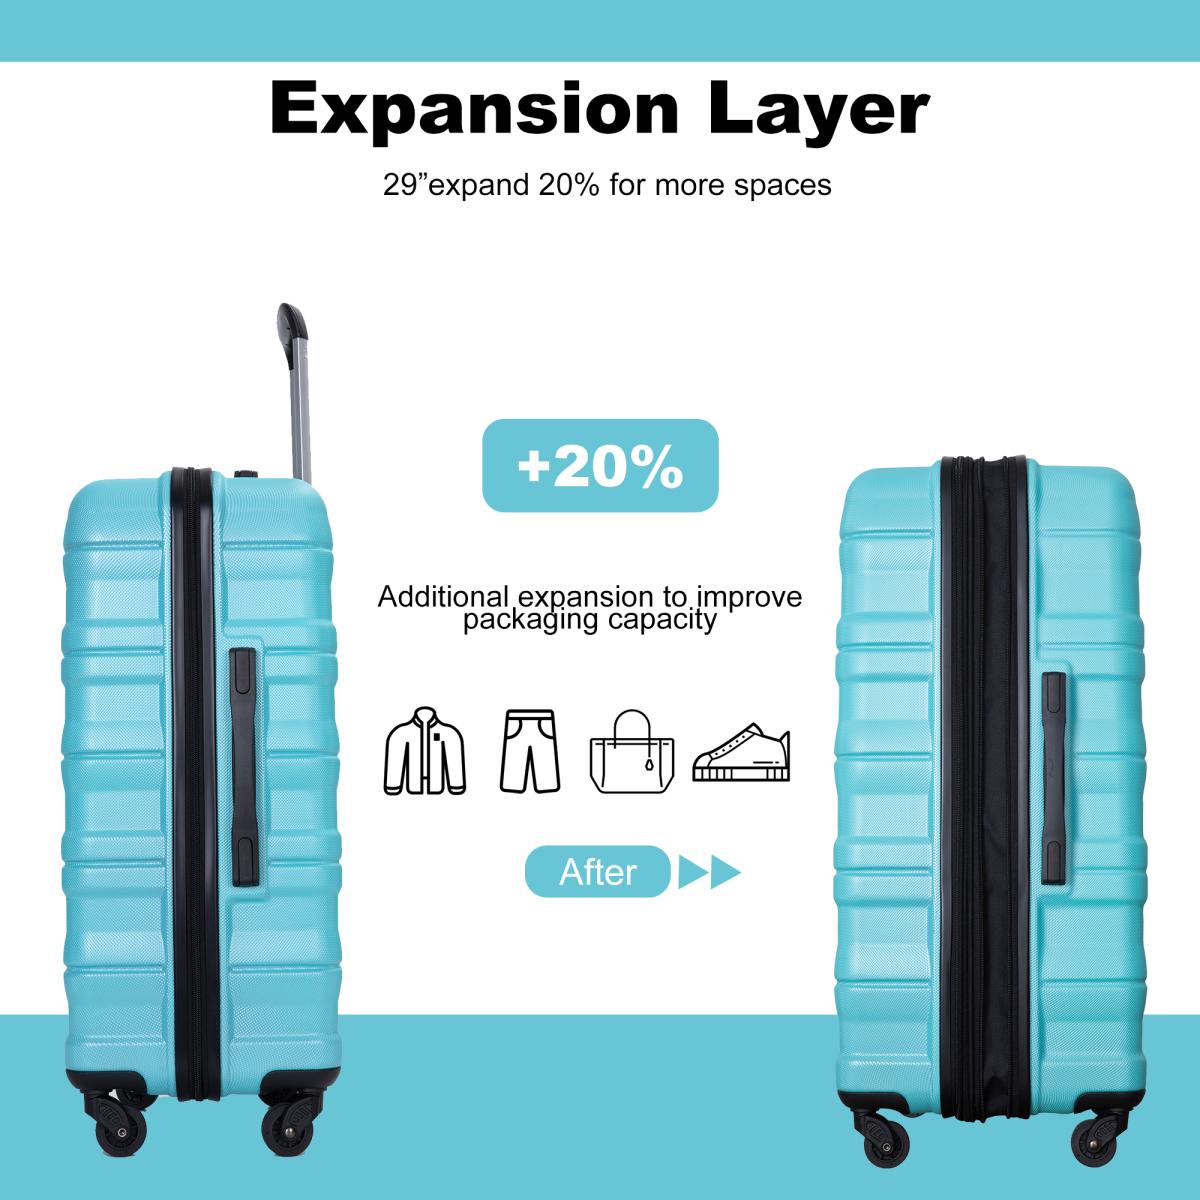 Expandable 3 Piece Luggage Sets Pc Lightweight & Durable Suitcase with Two Hooks, Spinner Wheels, Tsa Lock, (21/25/29) Aqua Blue